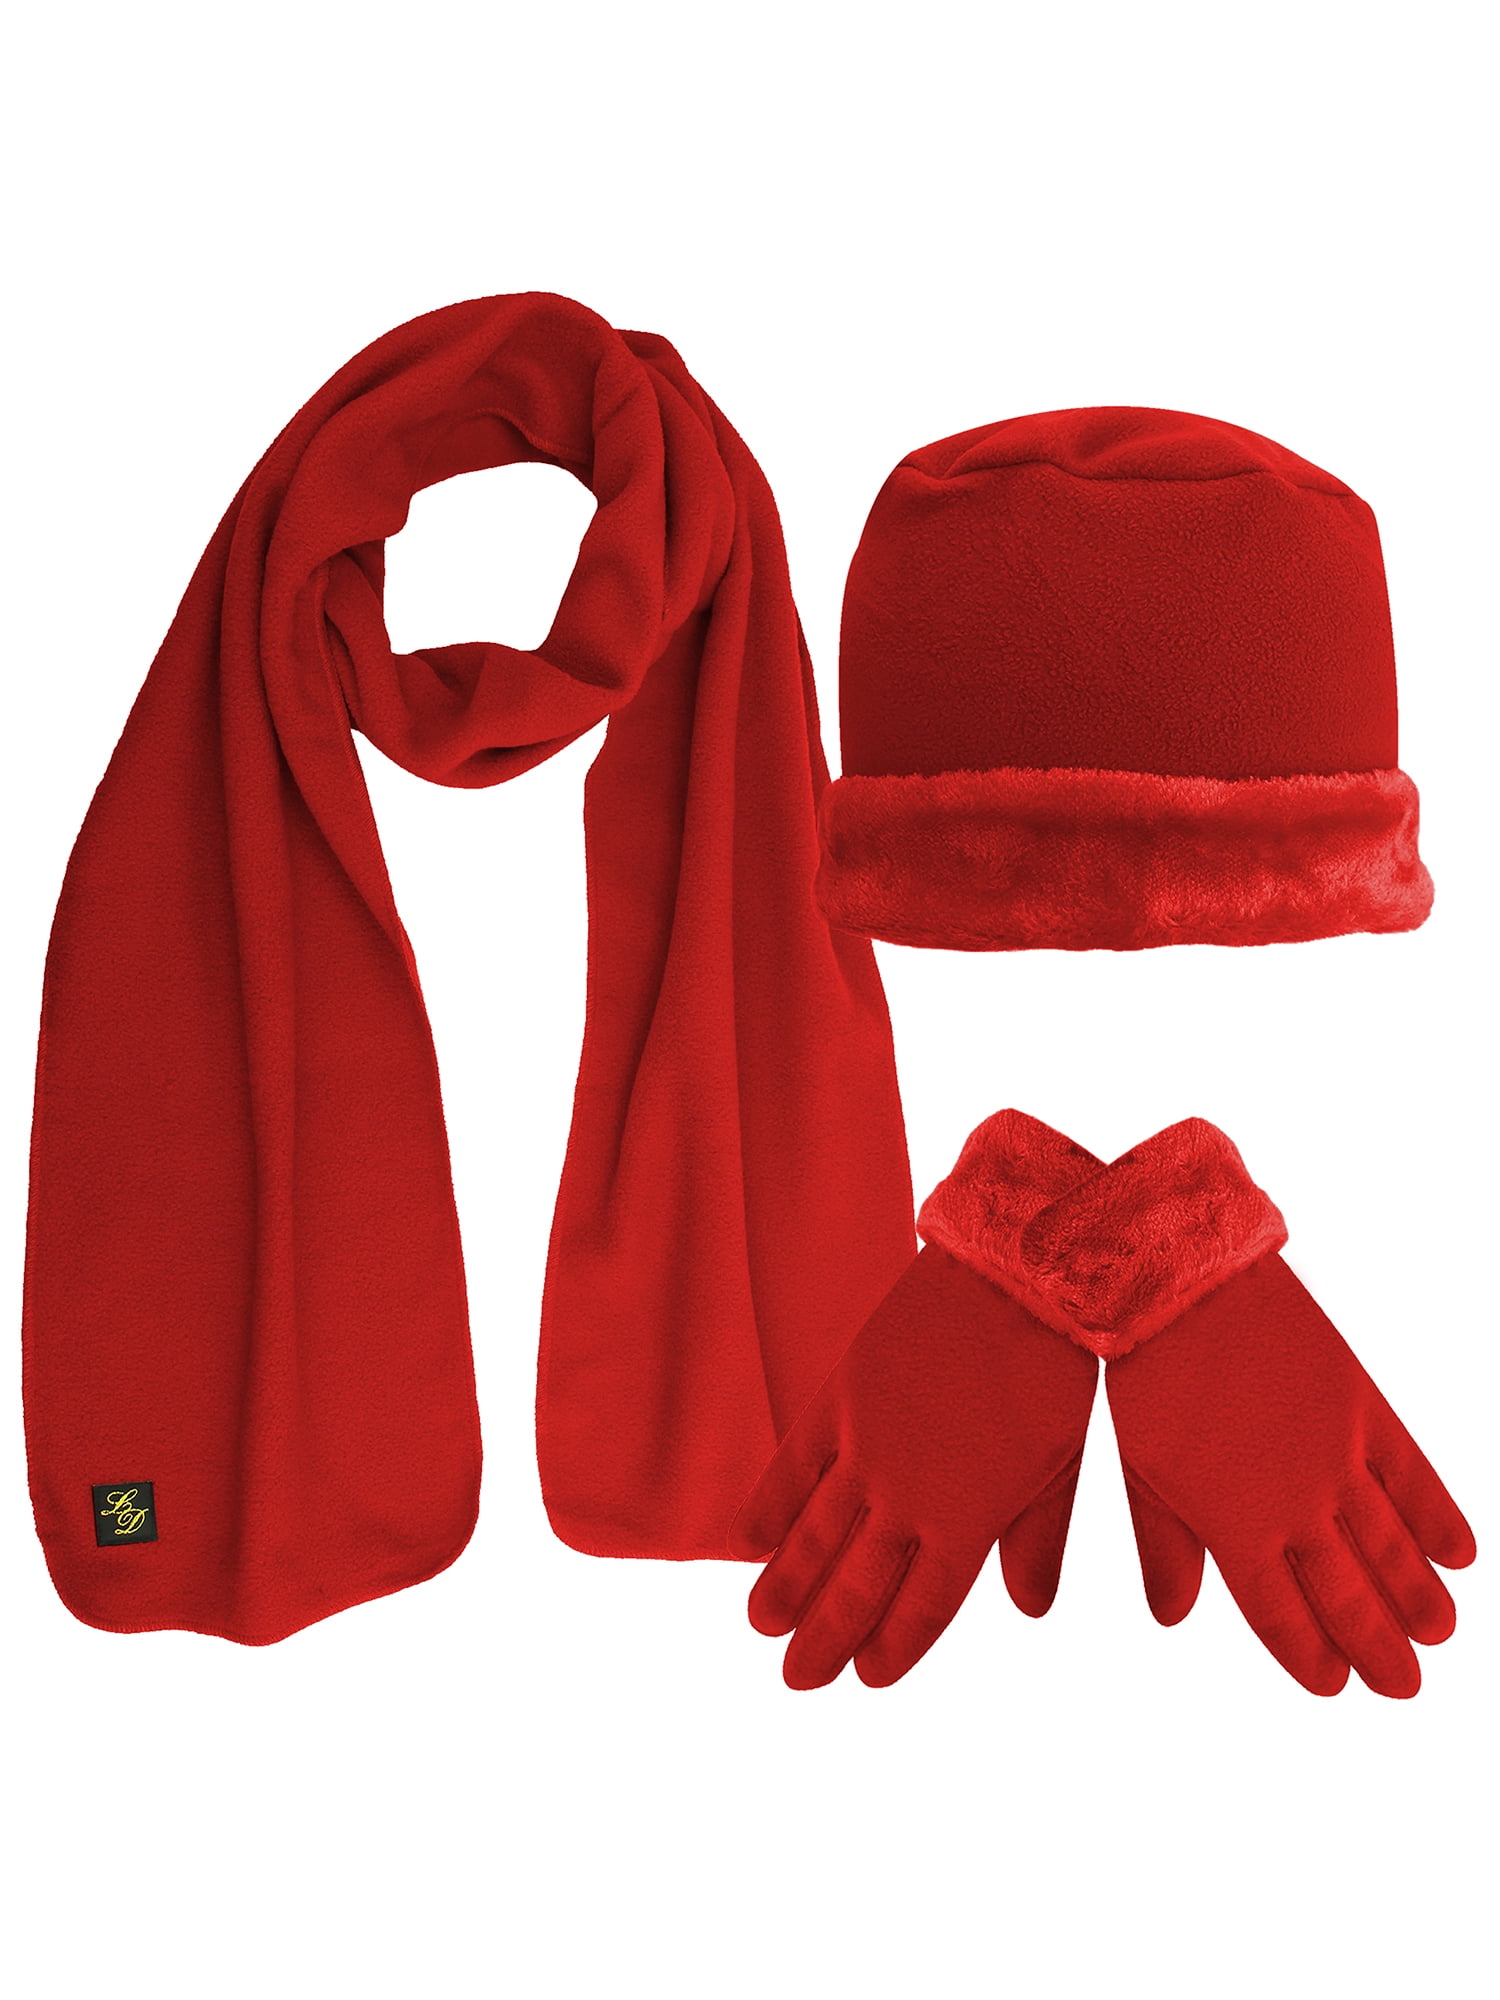 Scarf and Gloves Set Ideal for Winter 100% Polyester Kids Hat Unisex Girls or Boys Micro Fleece Material 3 Pieces Soft and Warm Matching Set 